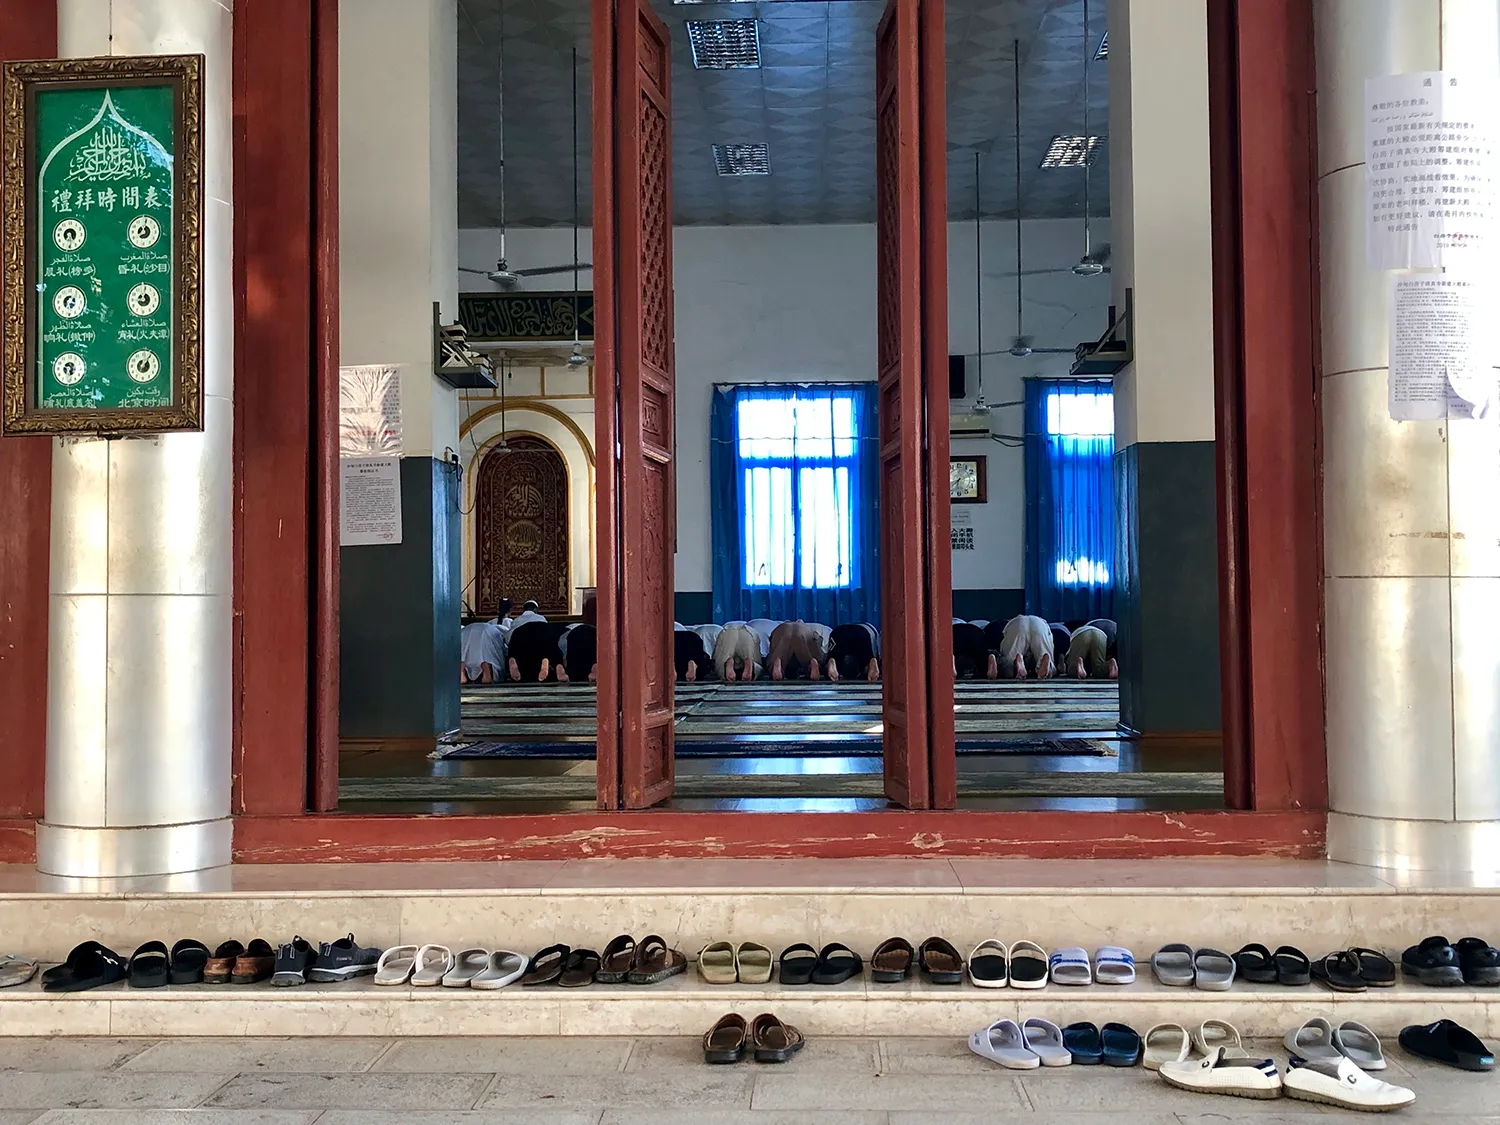 Worshippers gather at a mosque in Shadian, China.